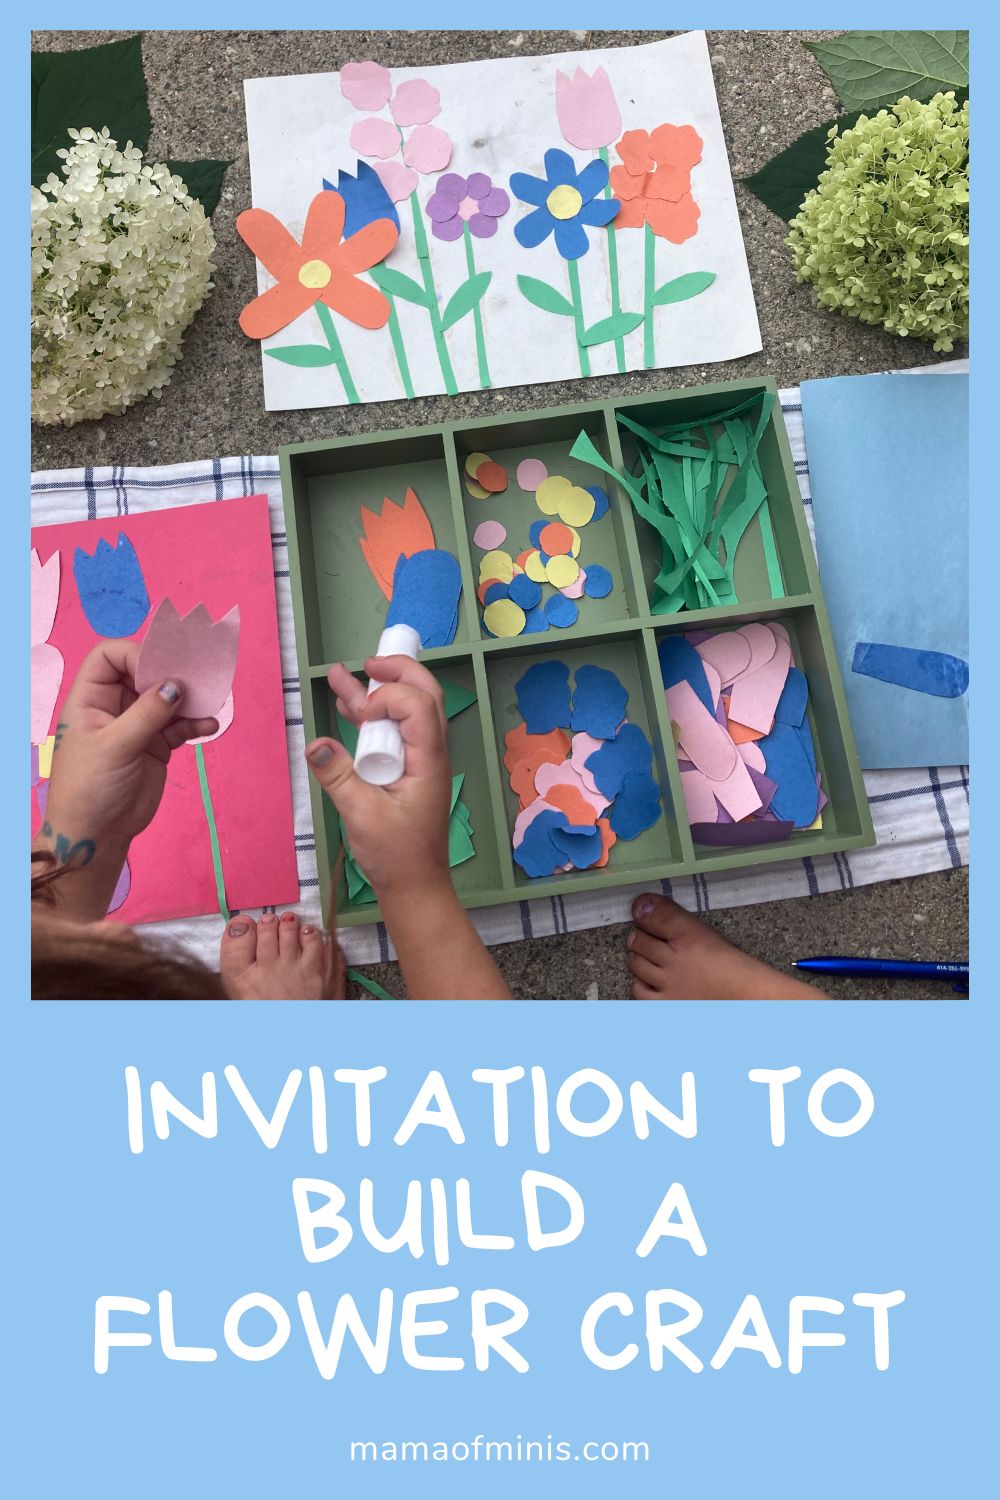 Invitation to Build a Flower Craft